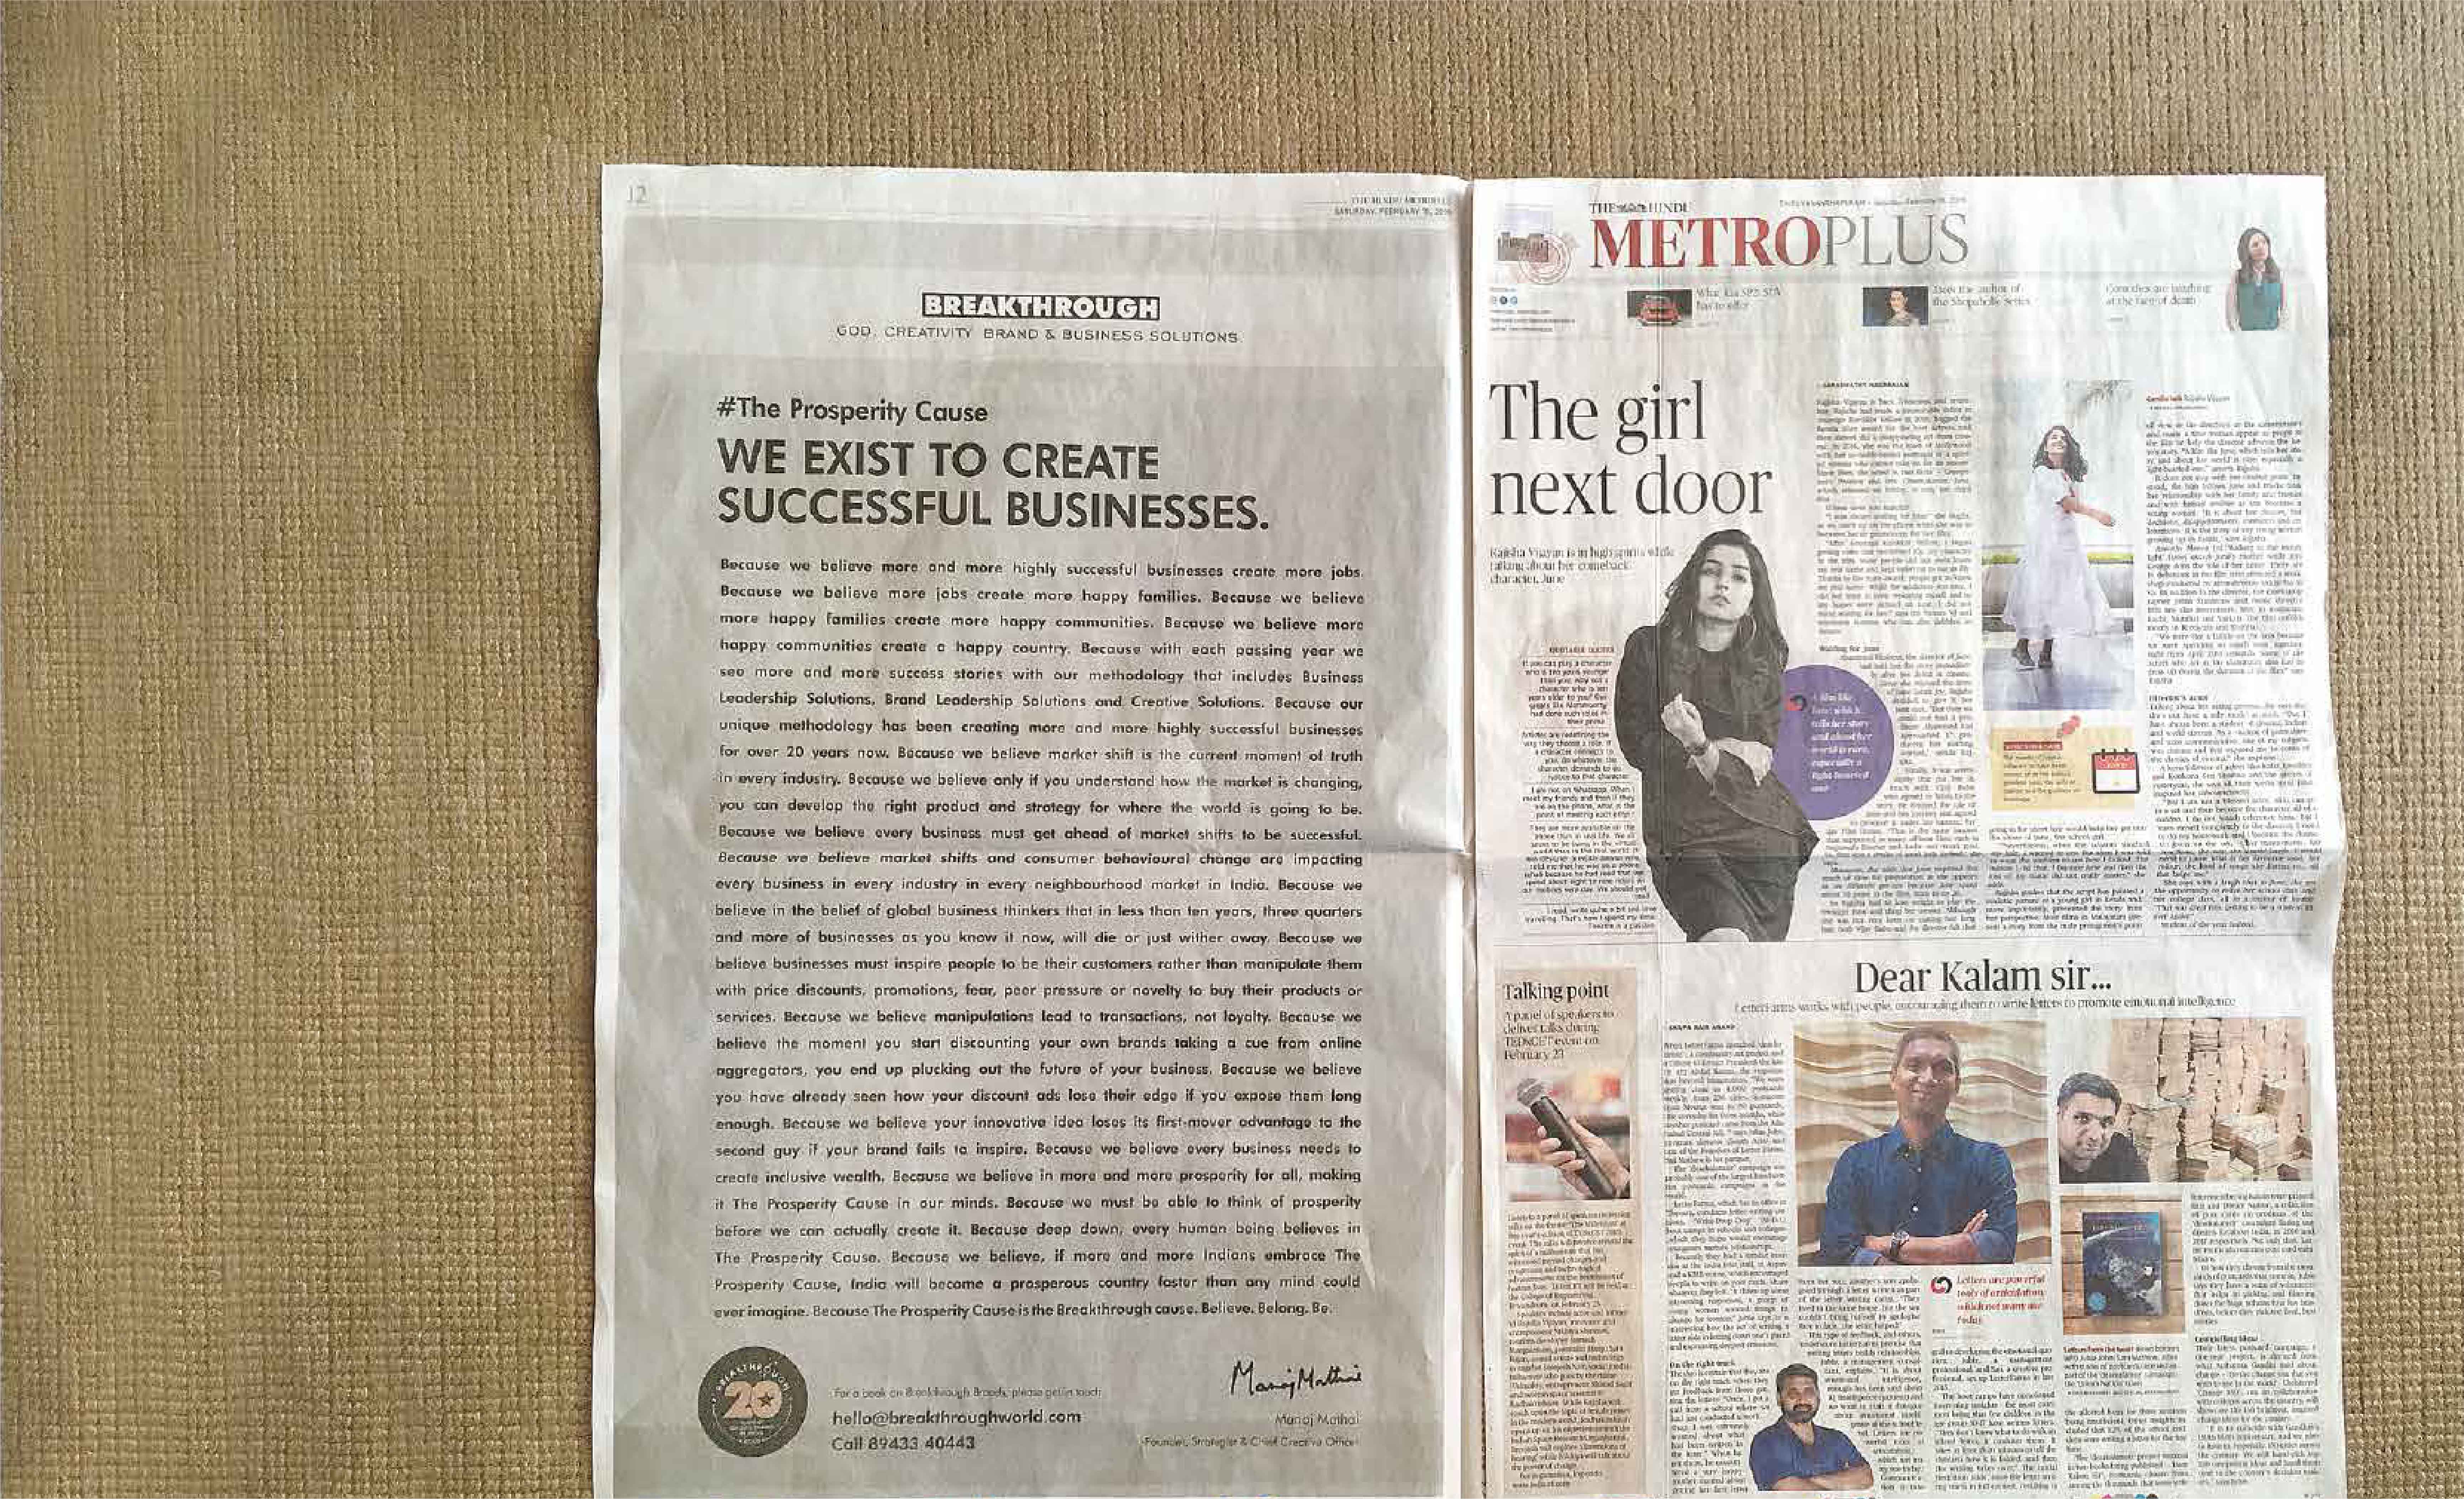 Breakthrough releases its first full page ad in its 20-year history in The Hindu.